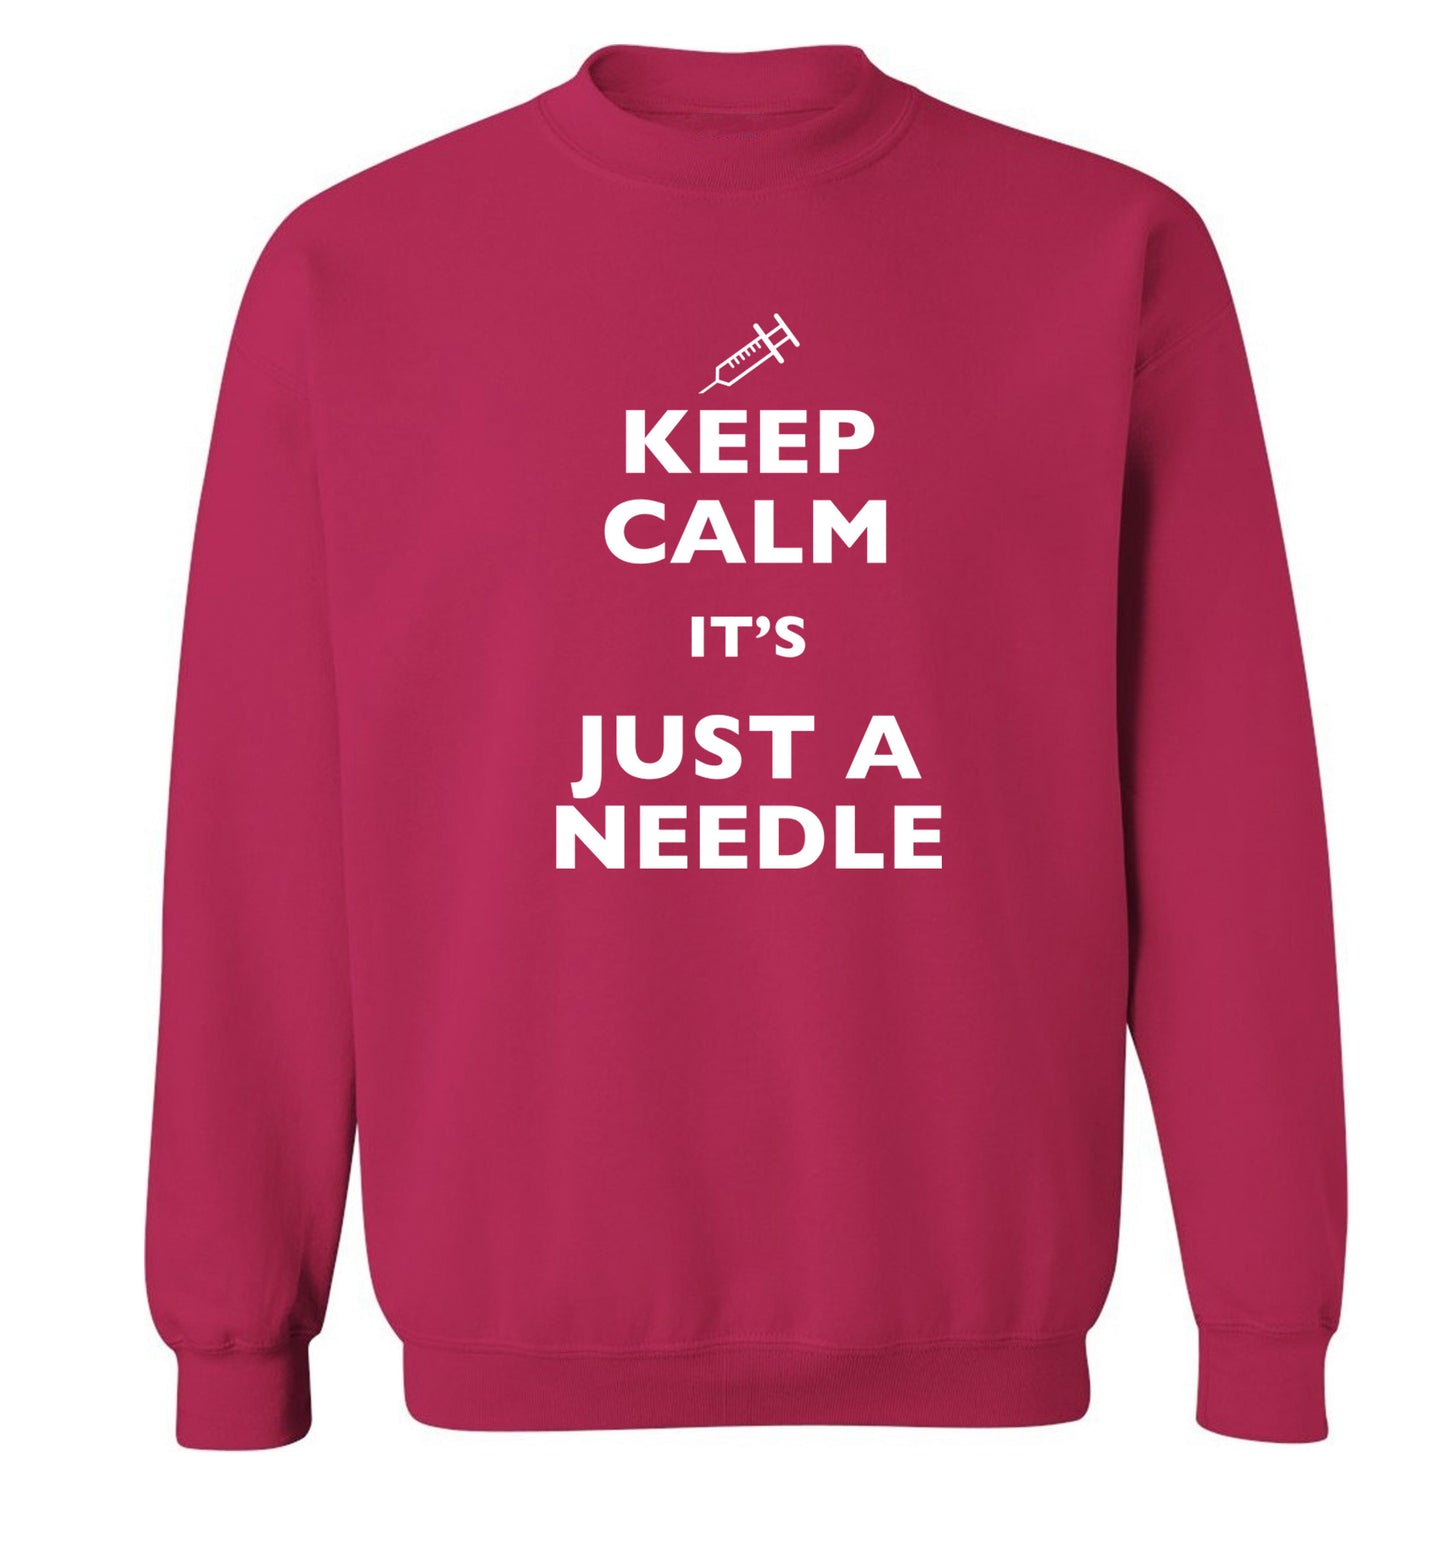 Keep calm it's only a needle Adult's unisex pink Sweater 2XL